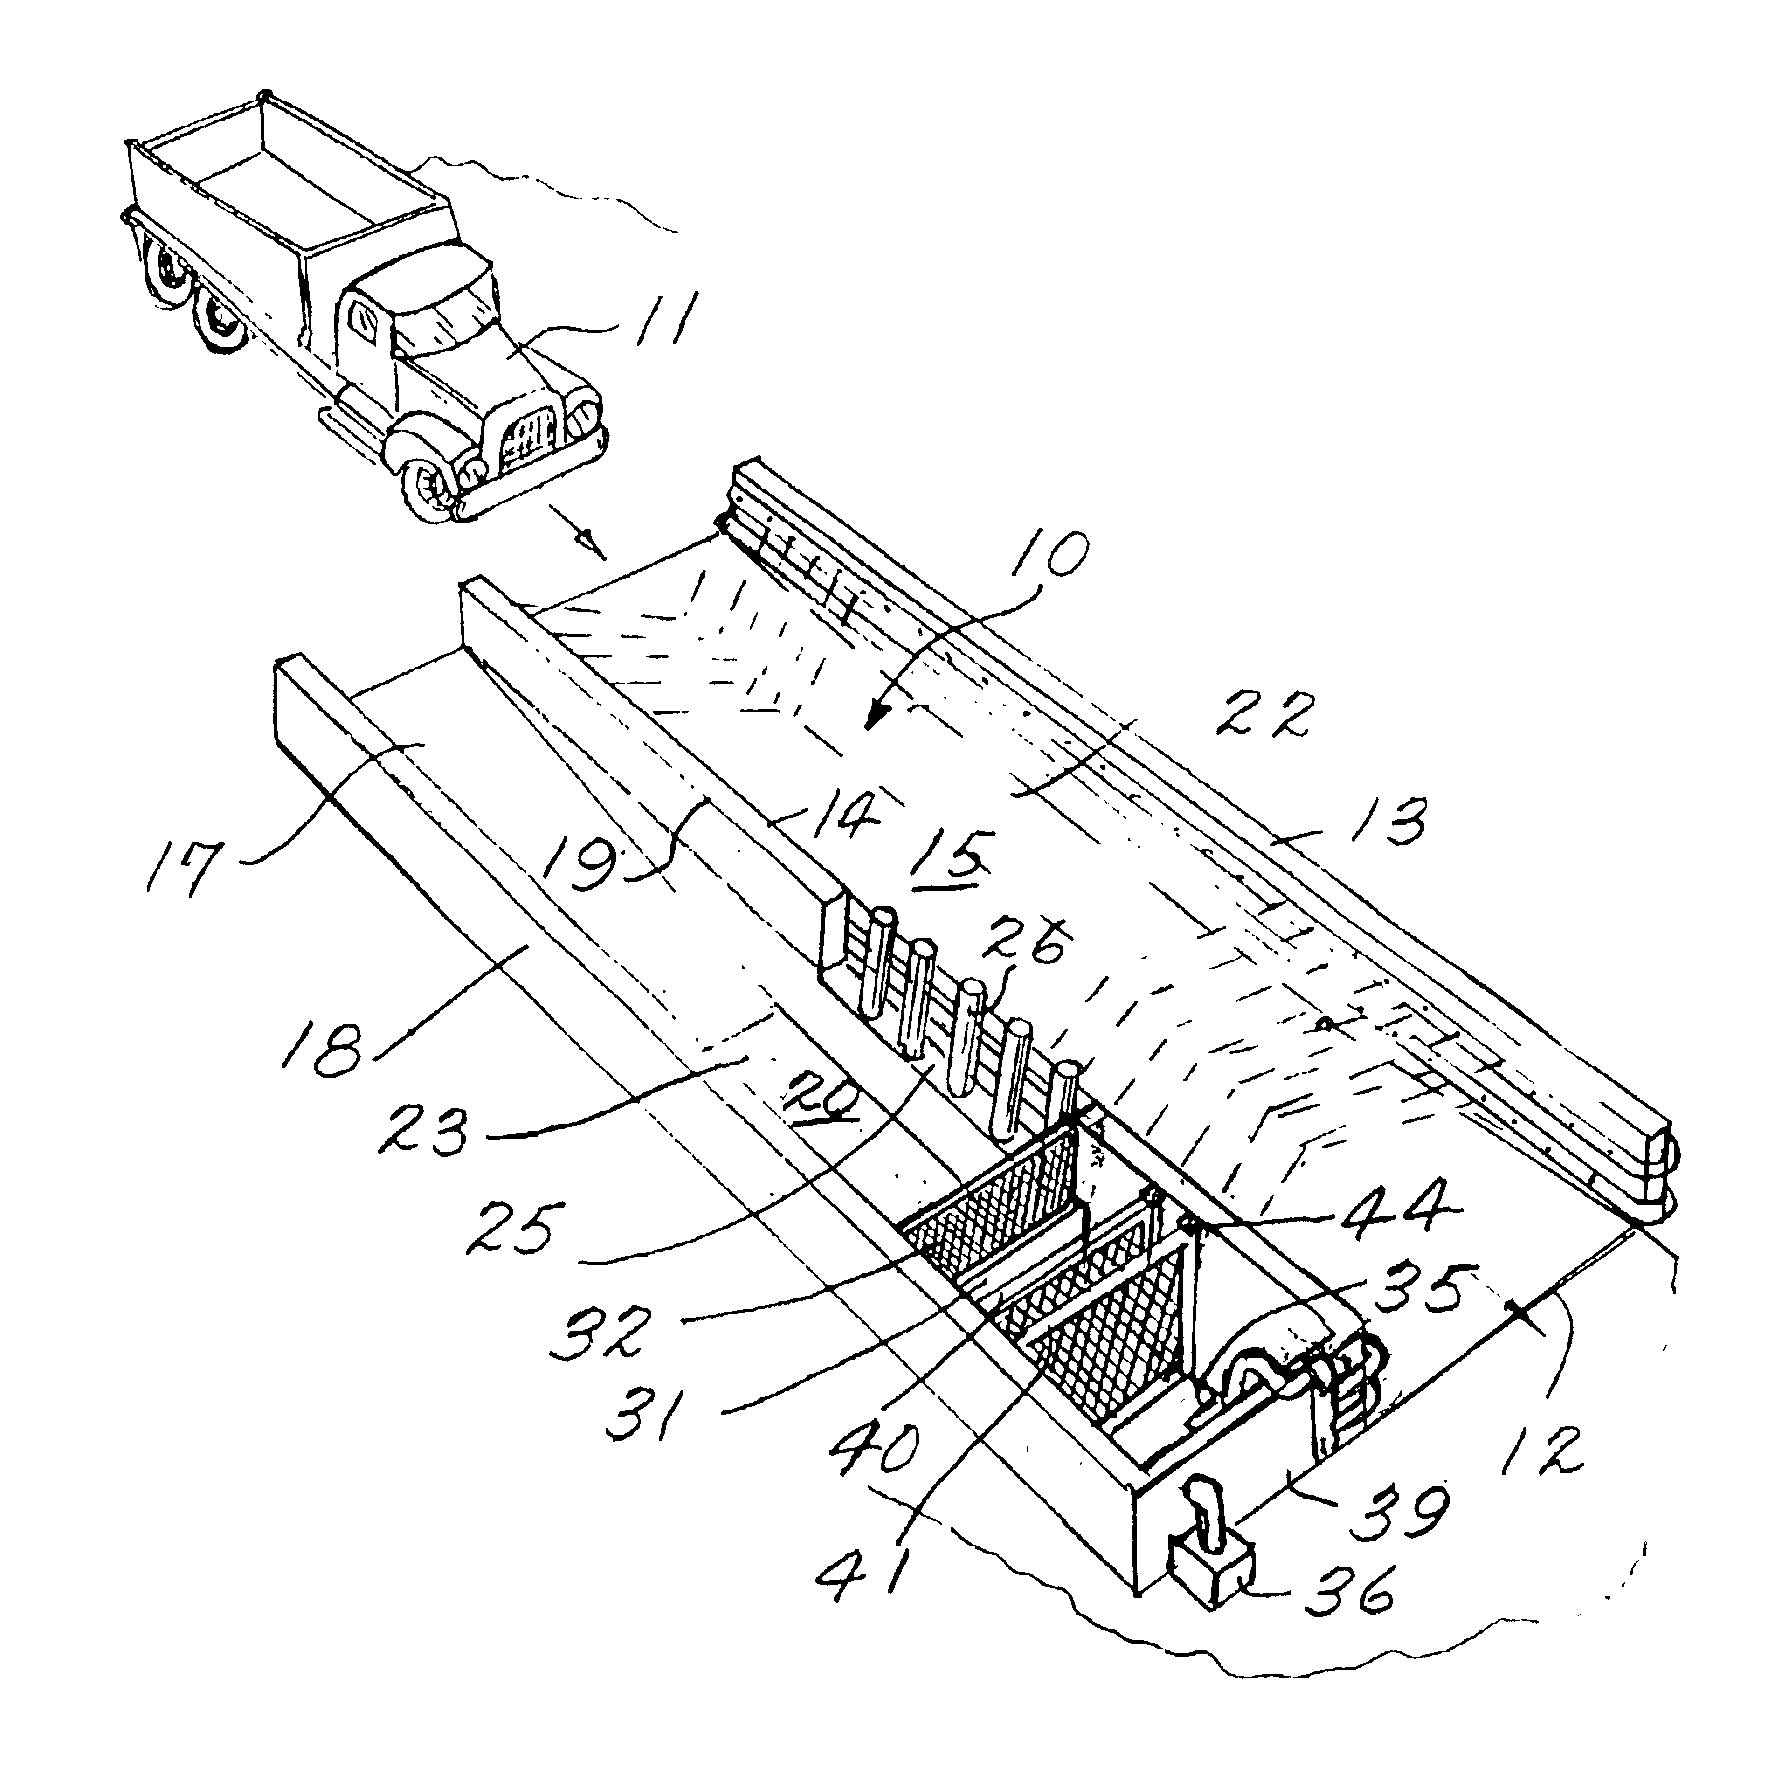 Apparatus for washing vehicle tires and wheels